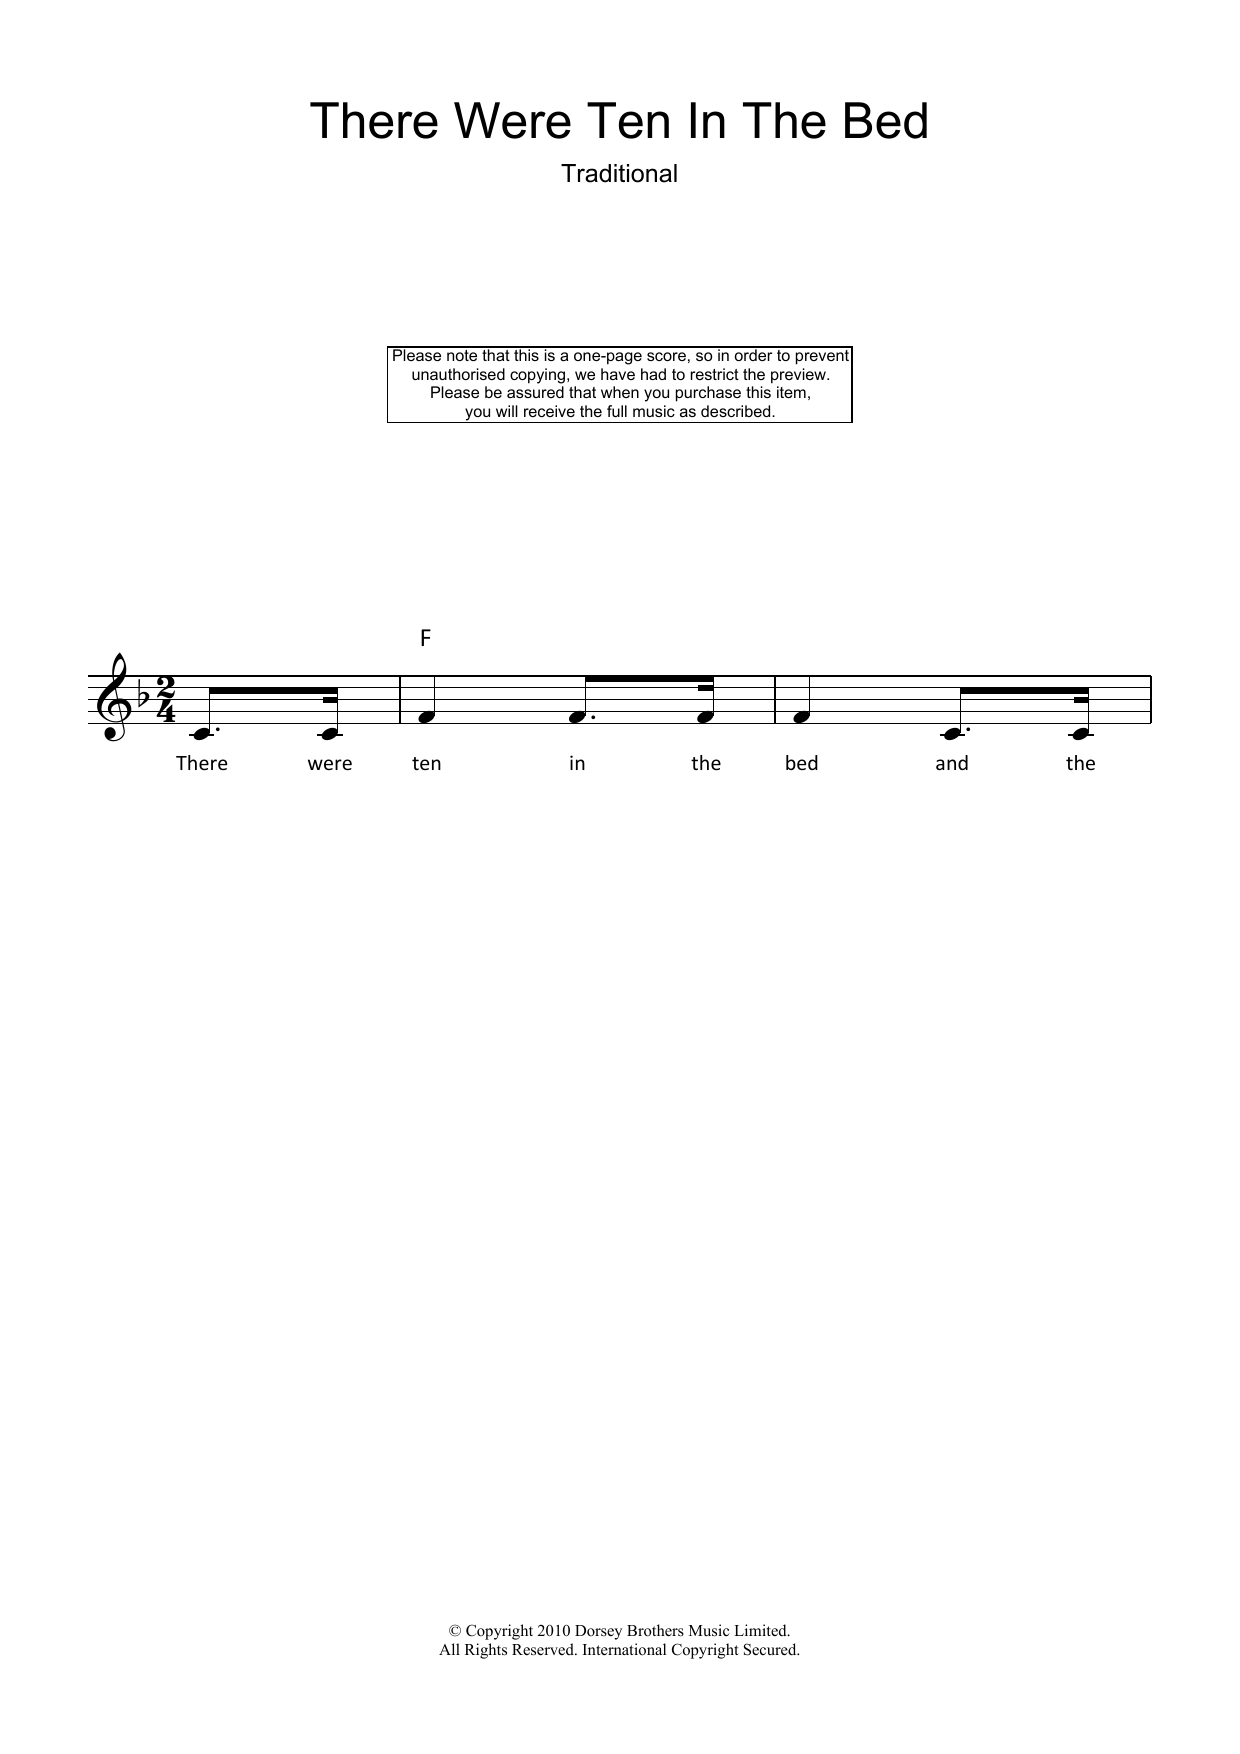 Download Traditional There Were Ten In The Bed Sheet Music